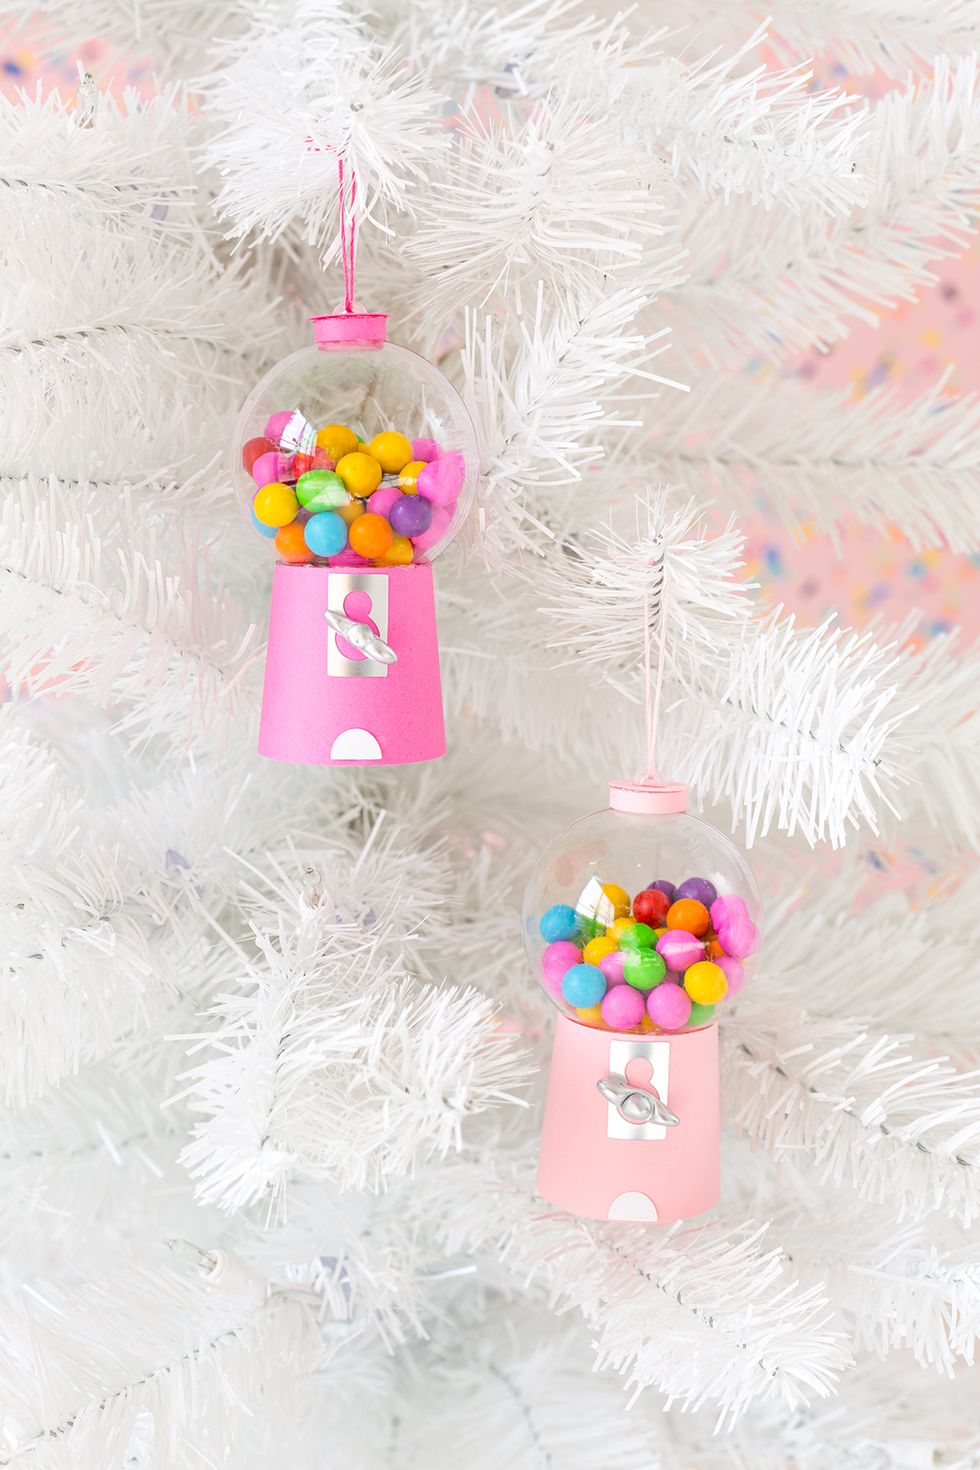 https://hips.hearstapps.com/hmg-prod/images/diy-christmas-ornaments-gumball-machine-1573667412.jpg?crop=1xw:1xh;center,top&resize=980:*